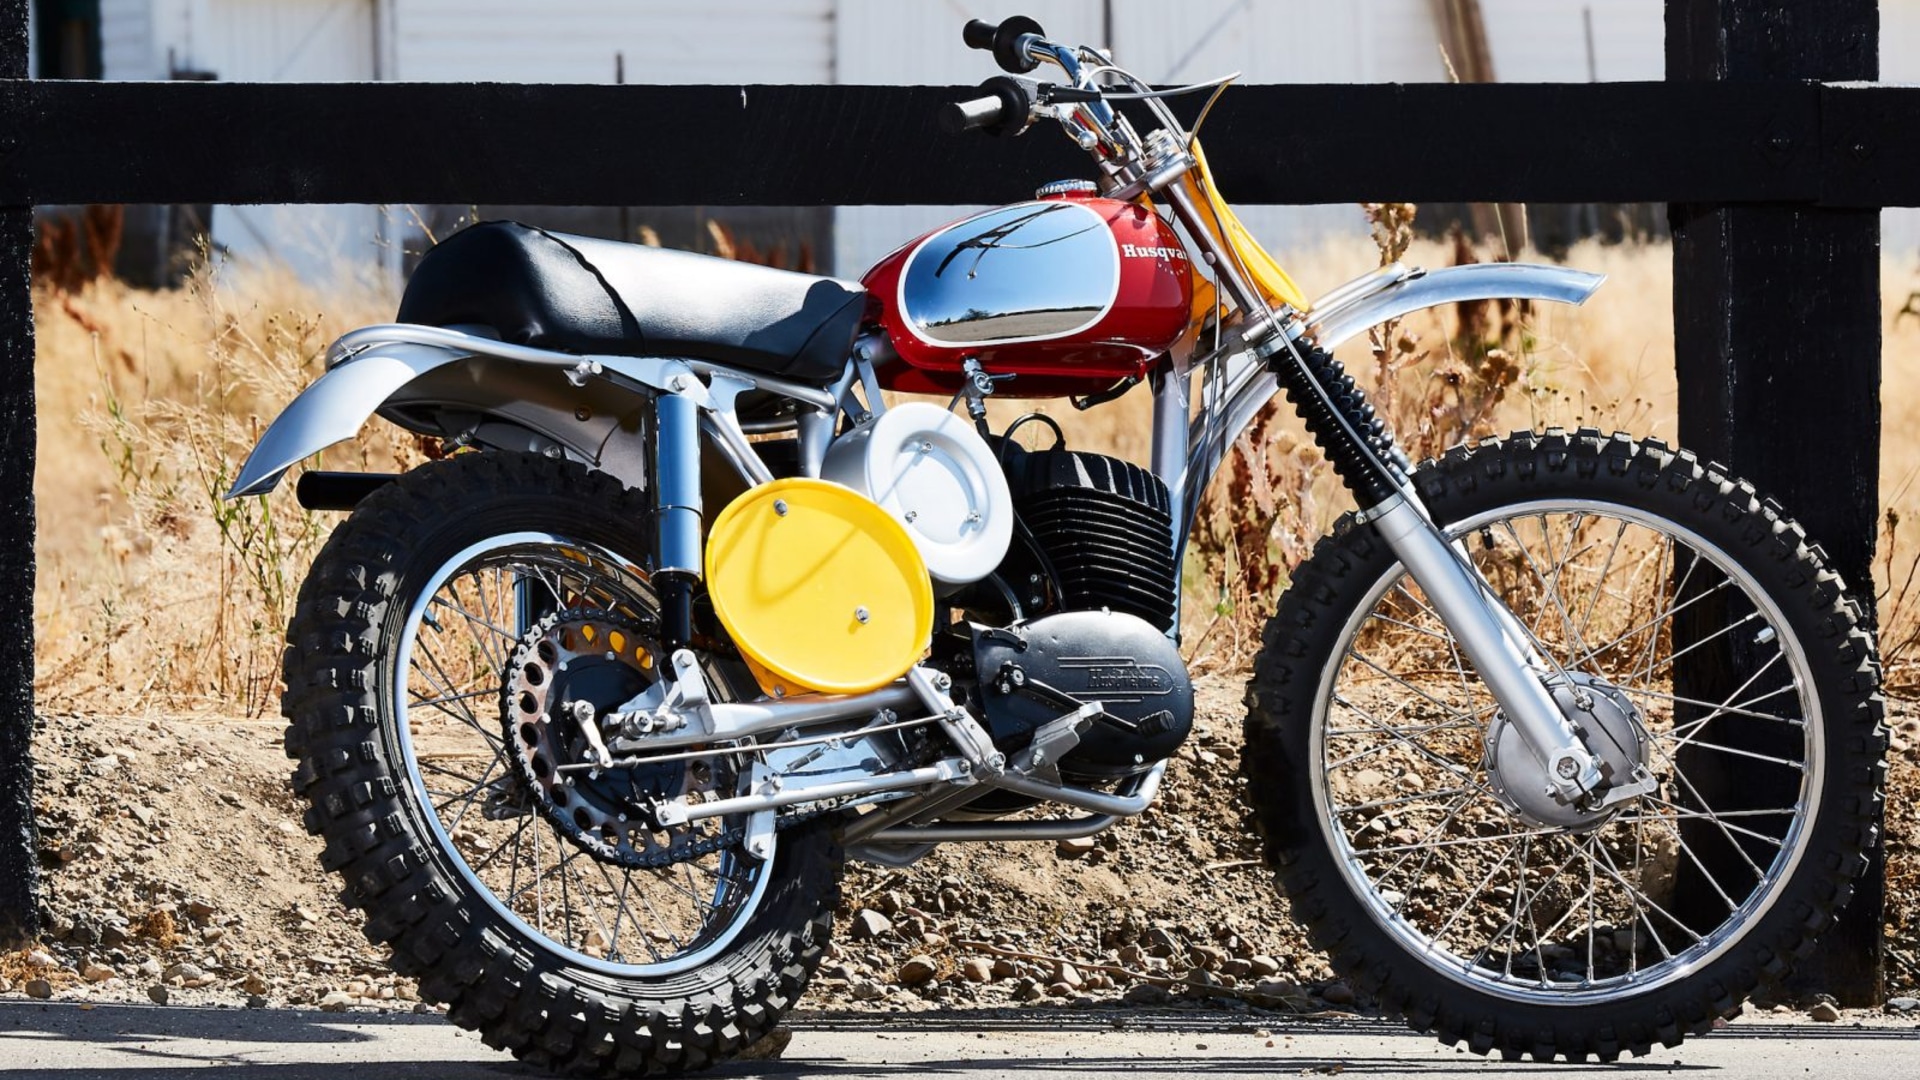 An Iconic Steve McQueen Motorcycle Is Up For Sale - Boss Hunting